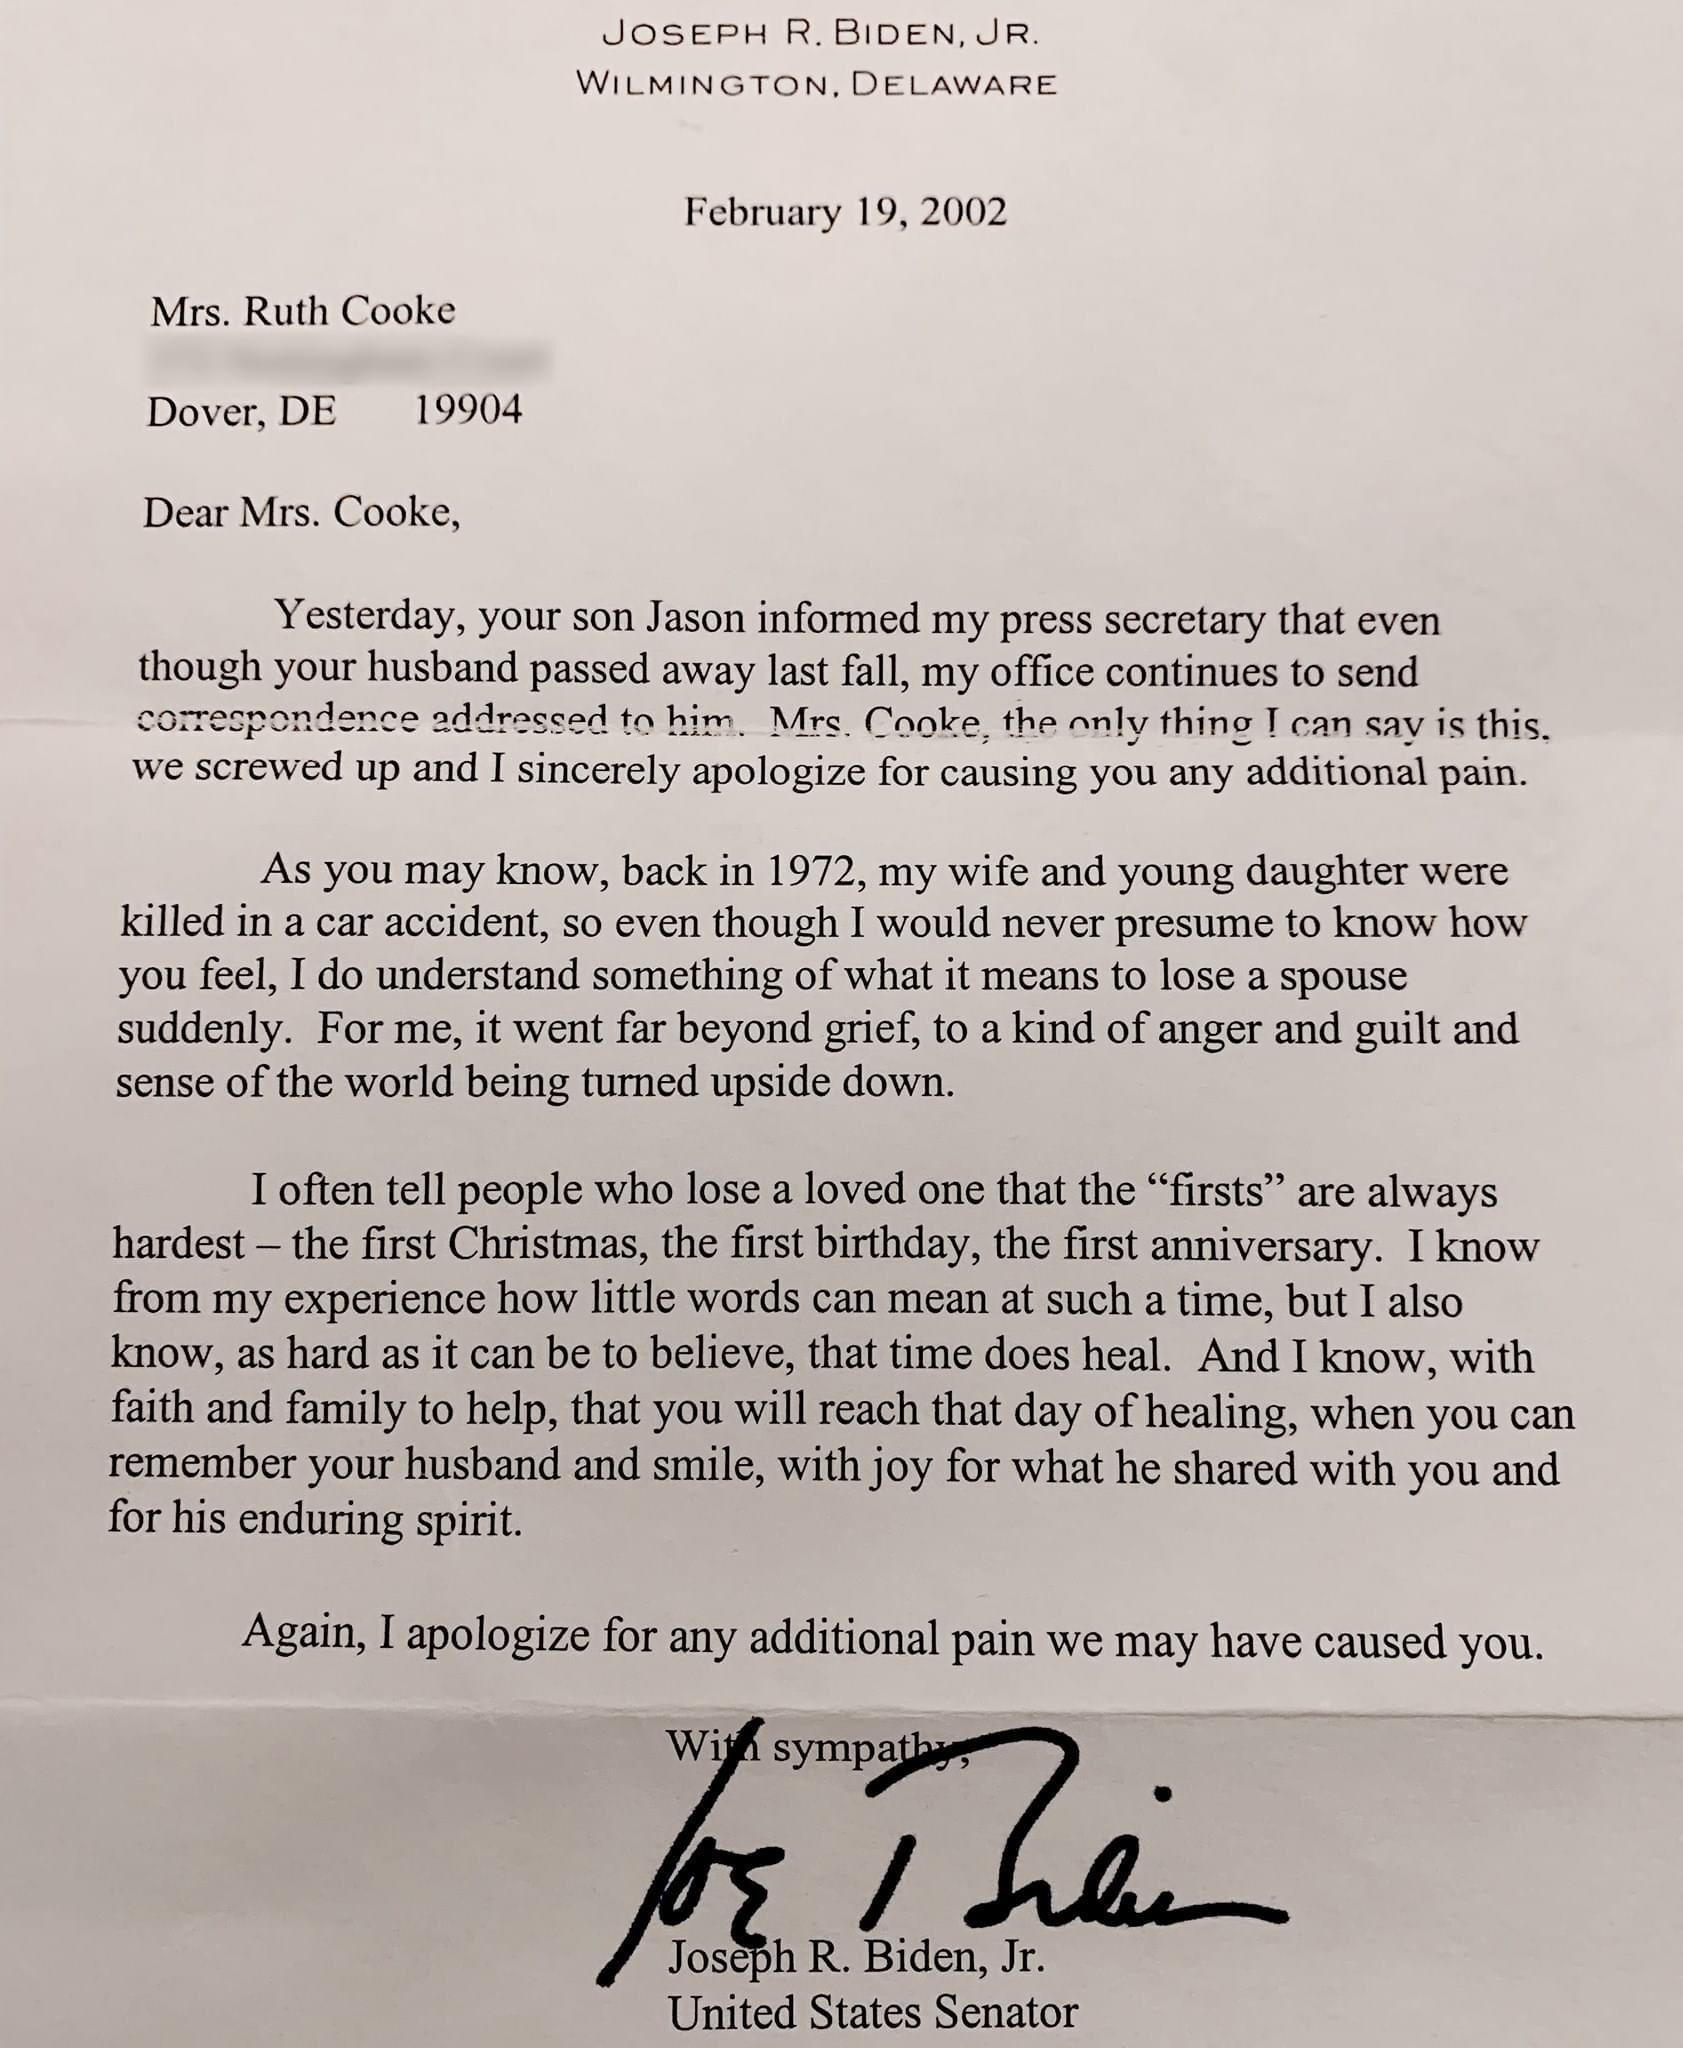 Biden Wrote This Letter to a Girl Who Misplaced Her Husband